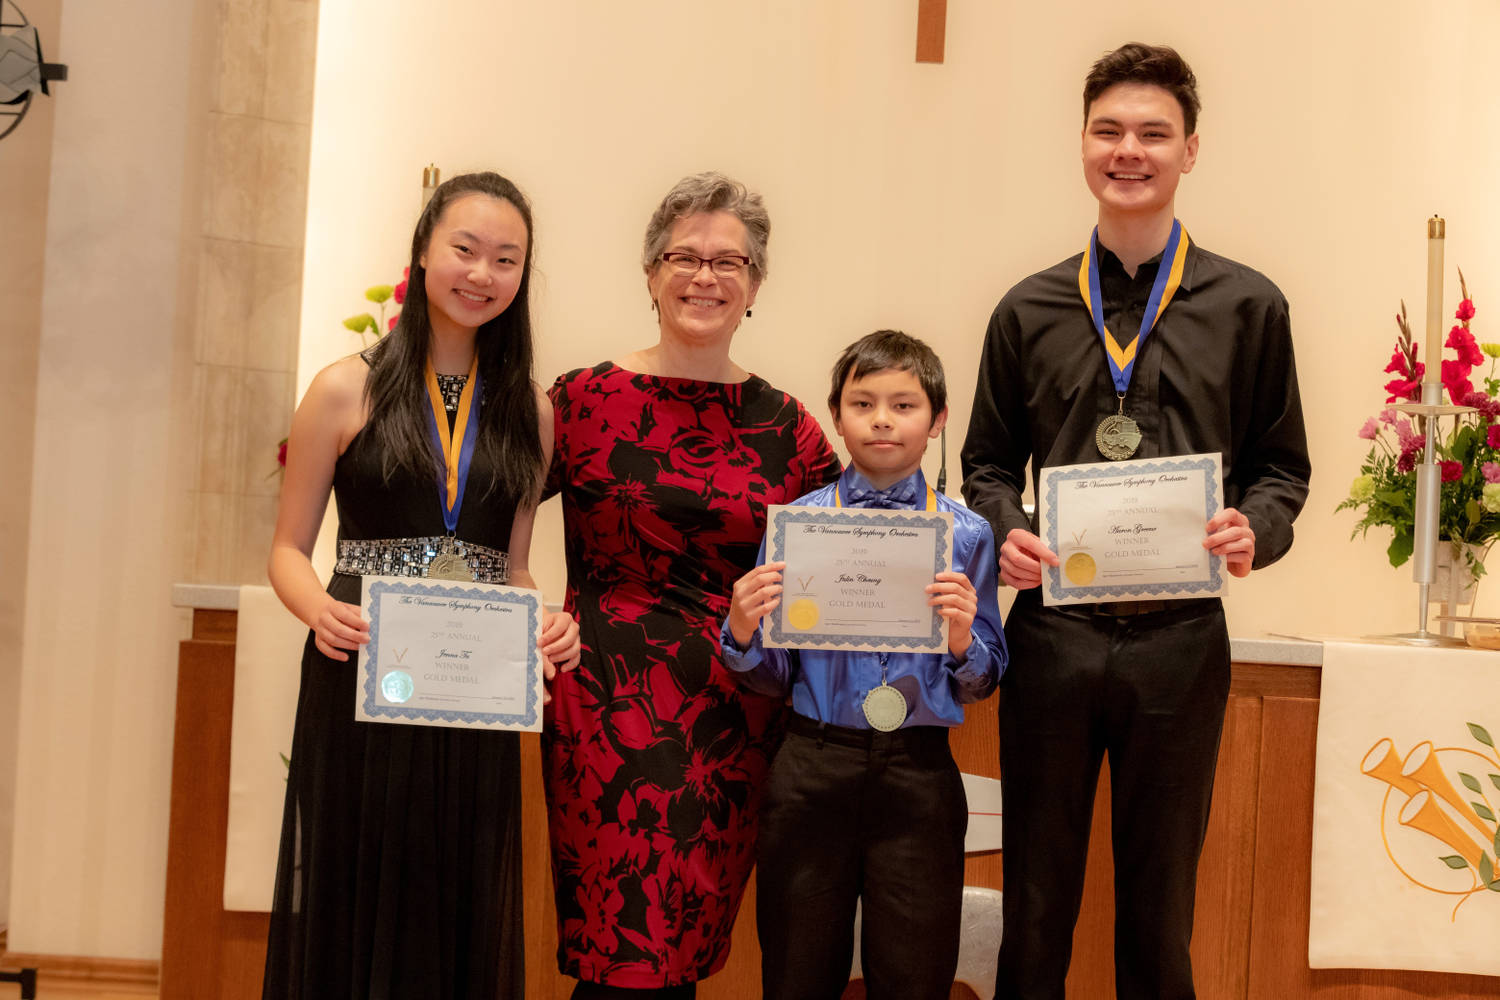 THE VANCOUVER SYMPHONY ORCHESTRA SUBSTANTIALLY INCREASES ITS 26TH ANNUAL YOUNG ARTISTS COMPETITION PRIZES